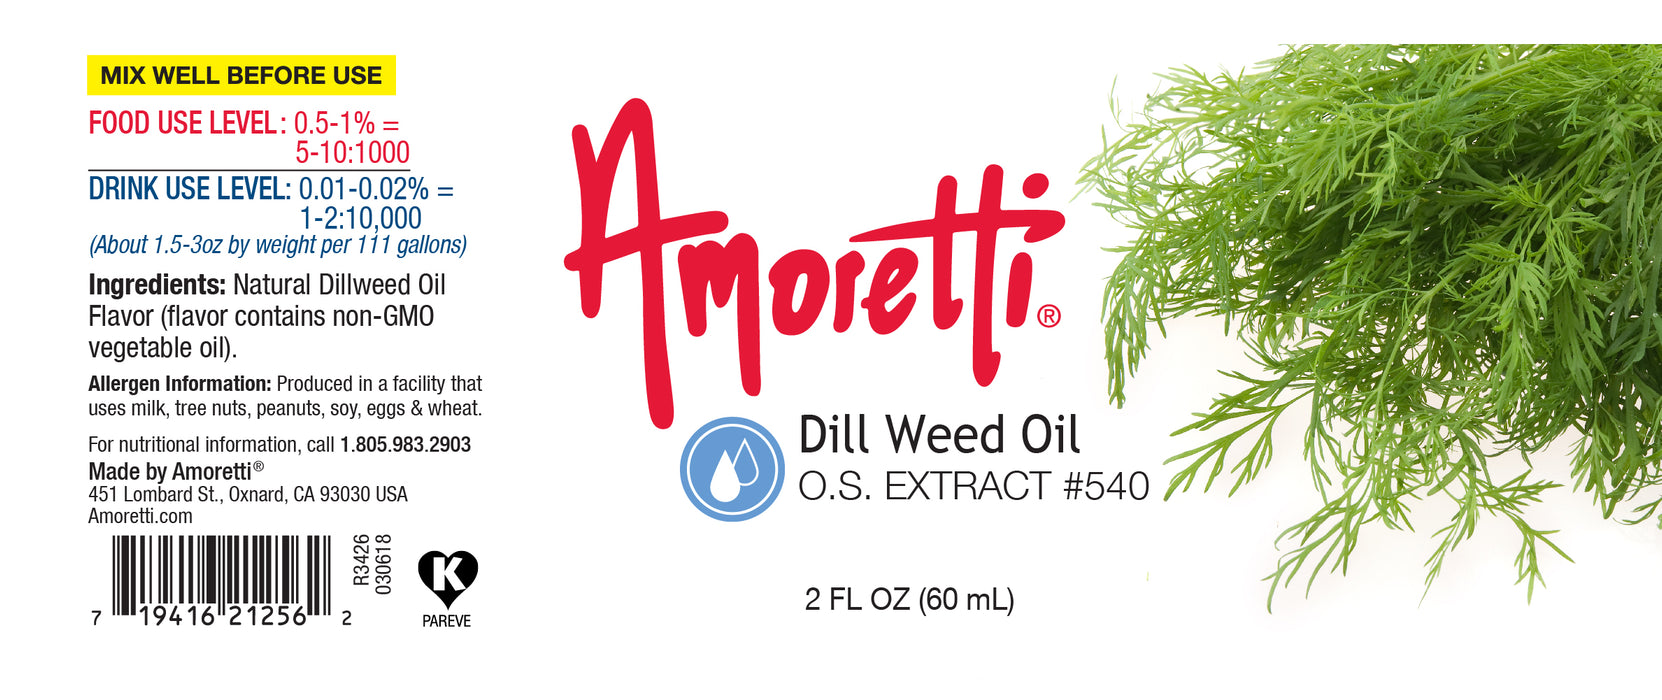 Dillweed Oil Extract Oil Soluble